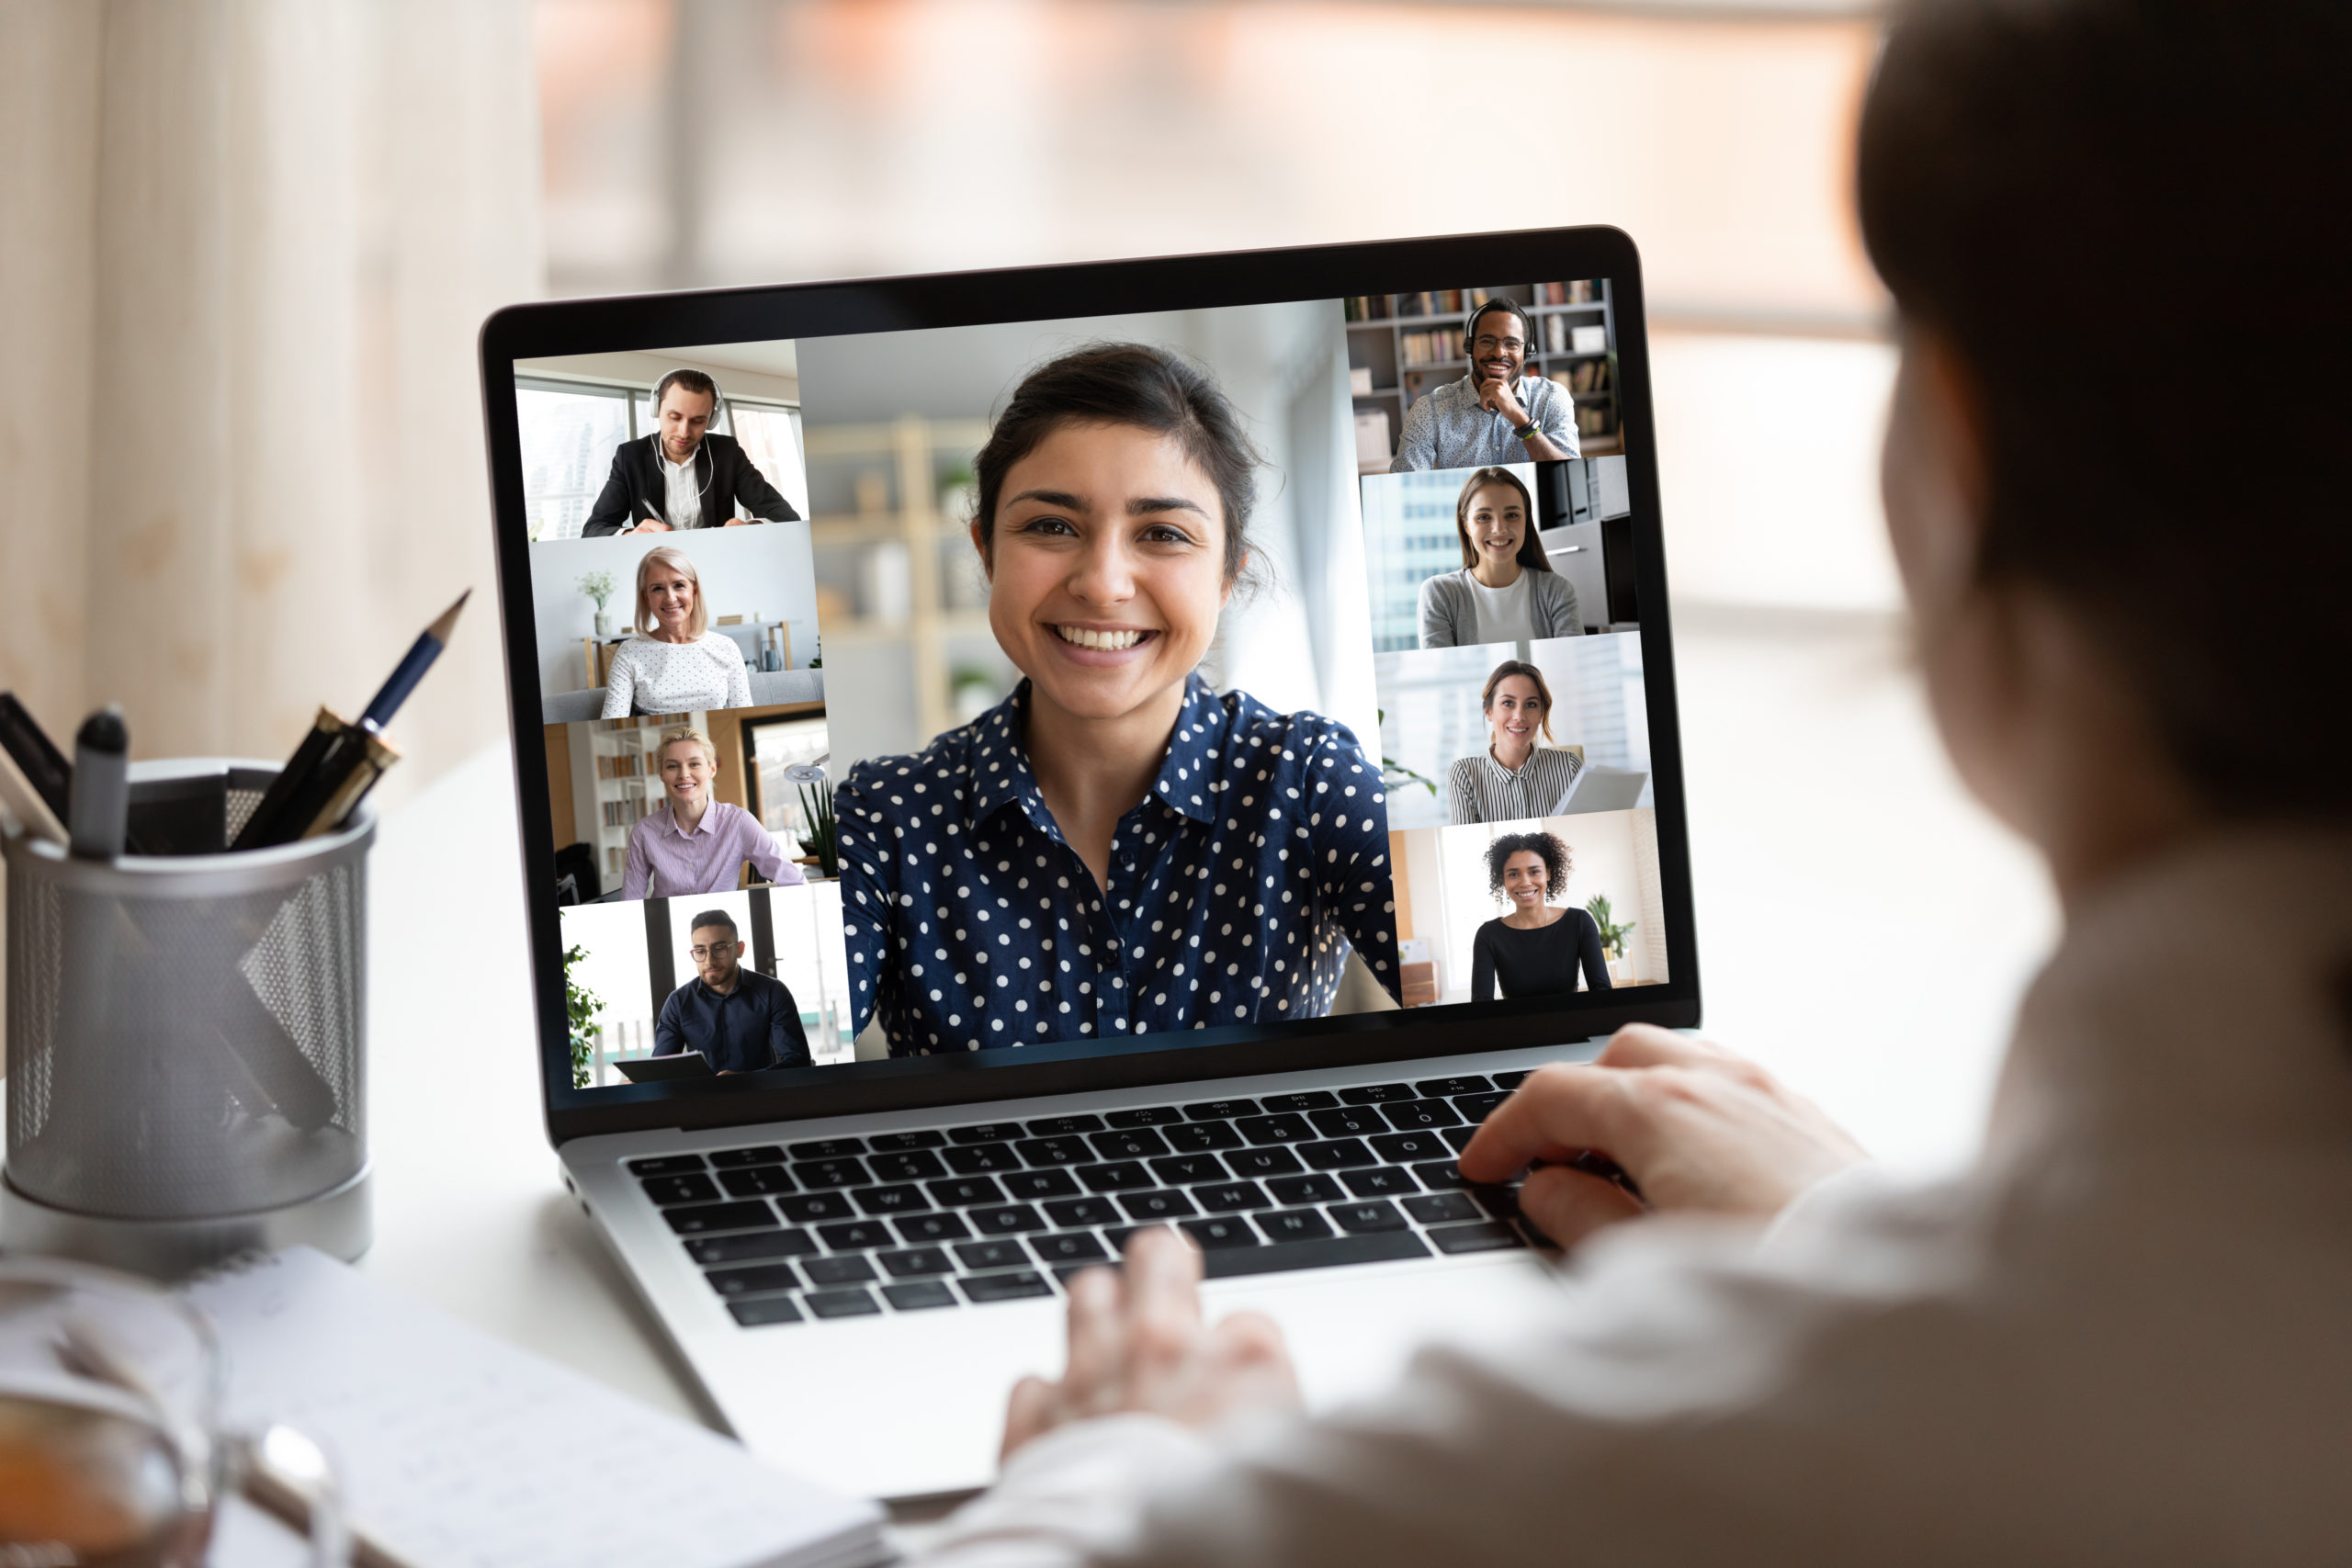 People connecting virtually via video conferencing